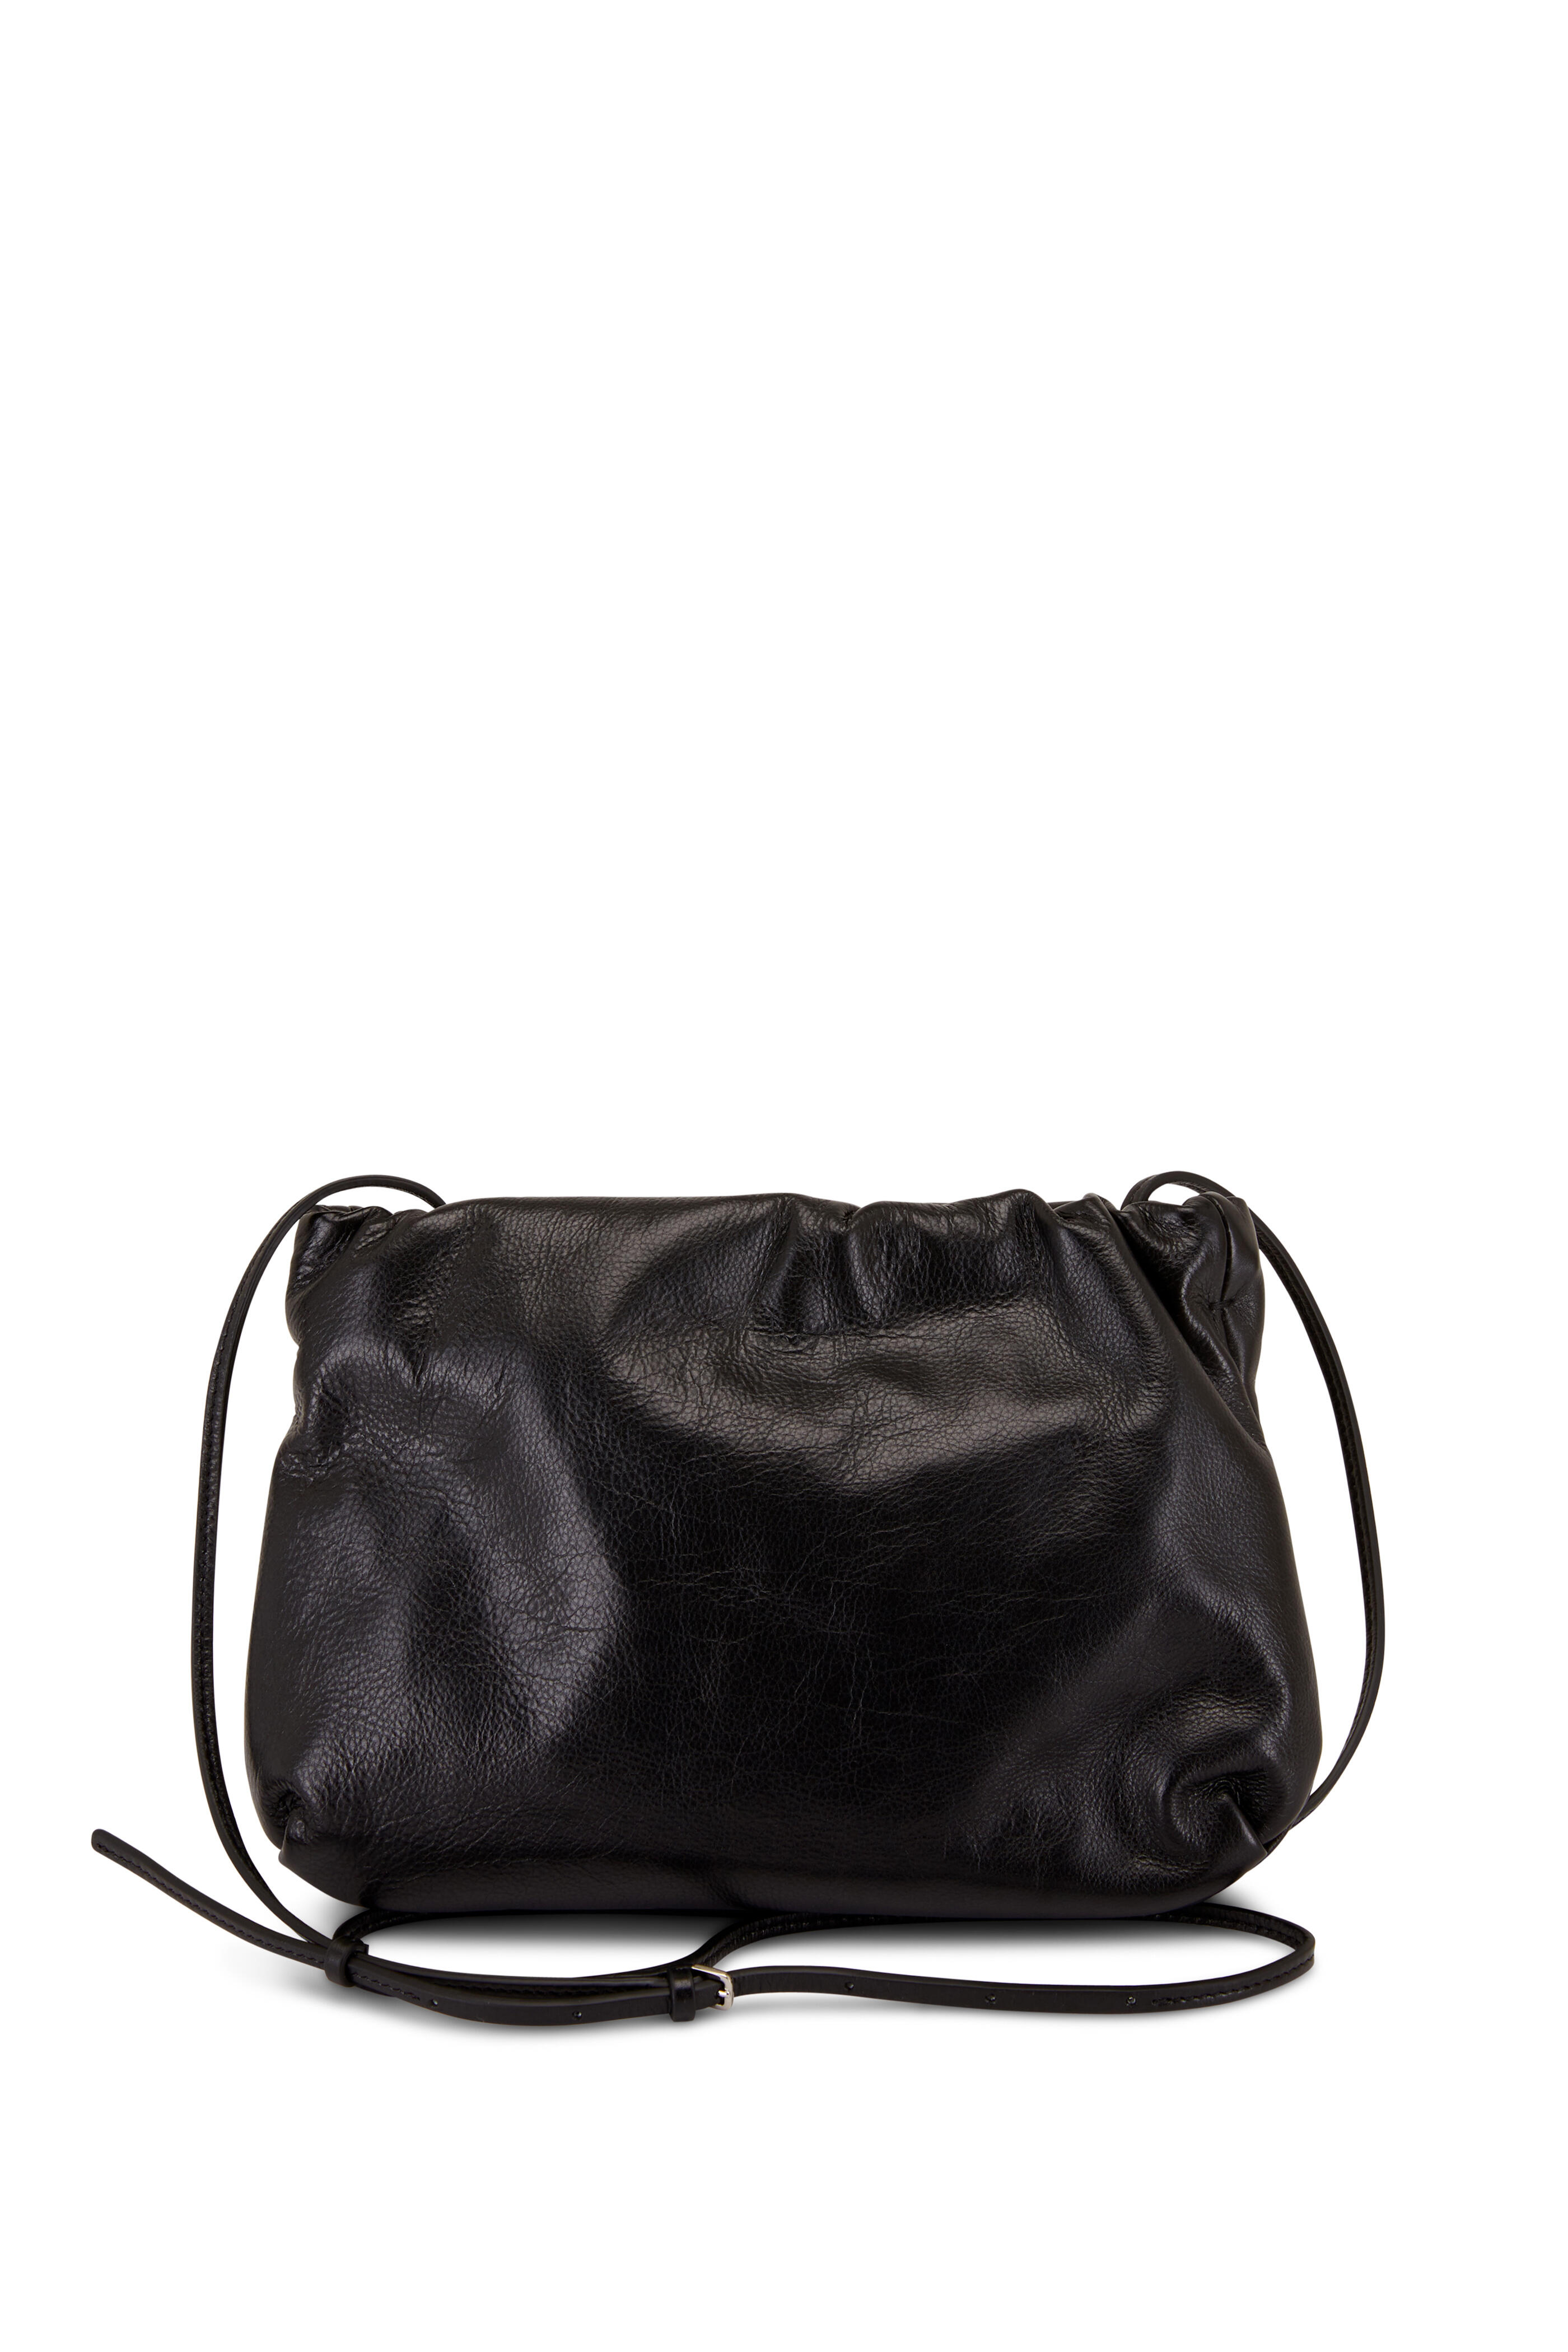 The Row - Bourse Black Leather Shoulder Bag | Mitchell Stores